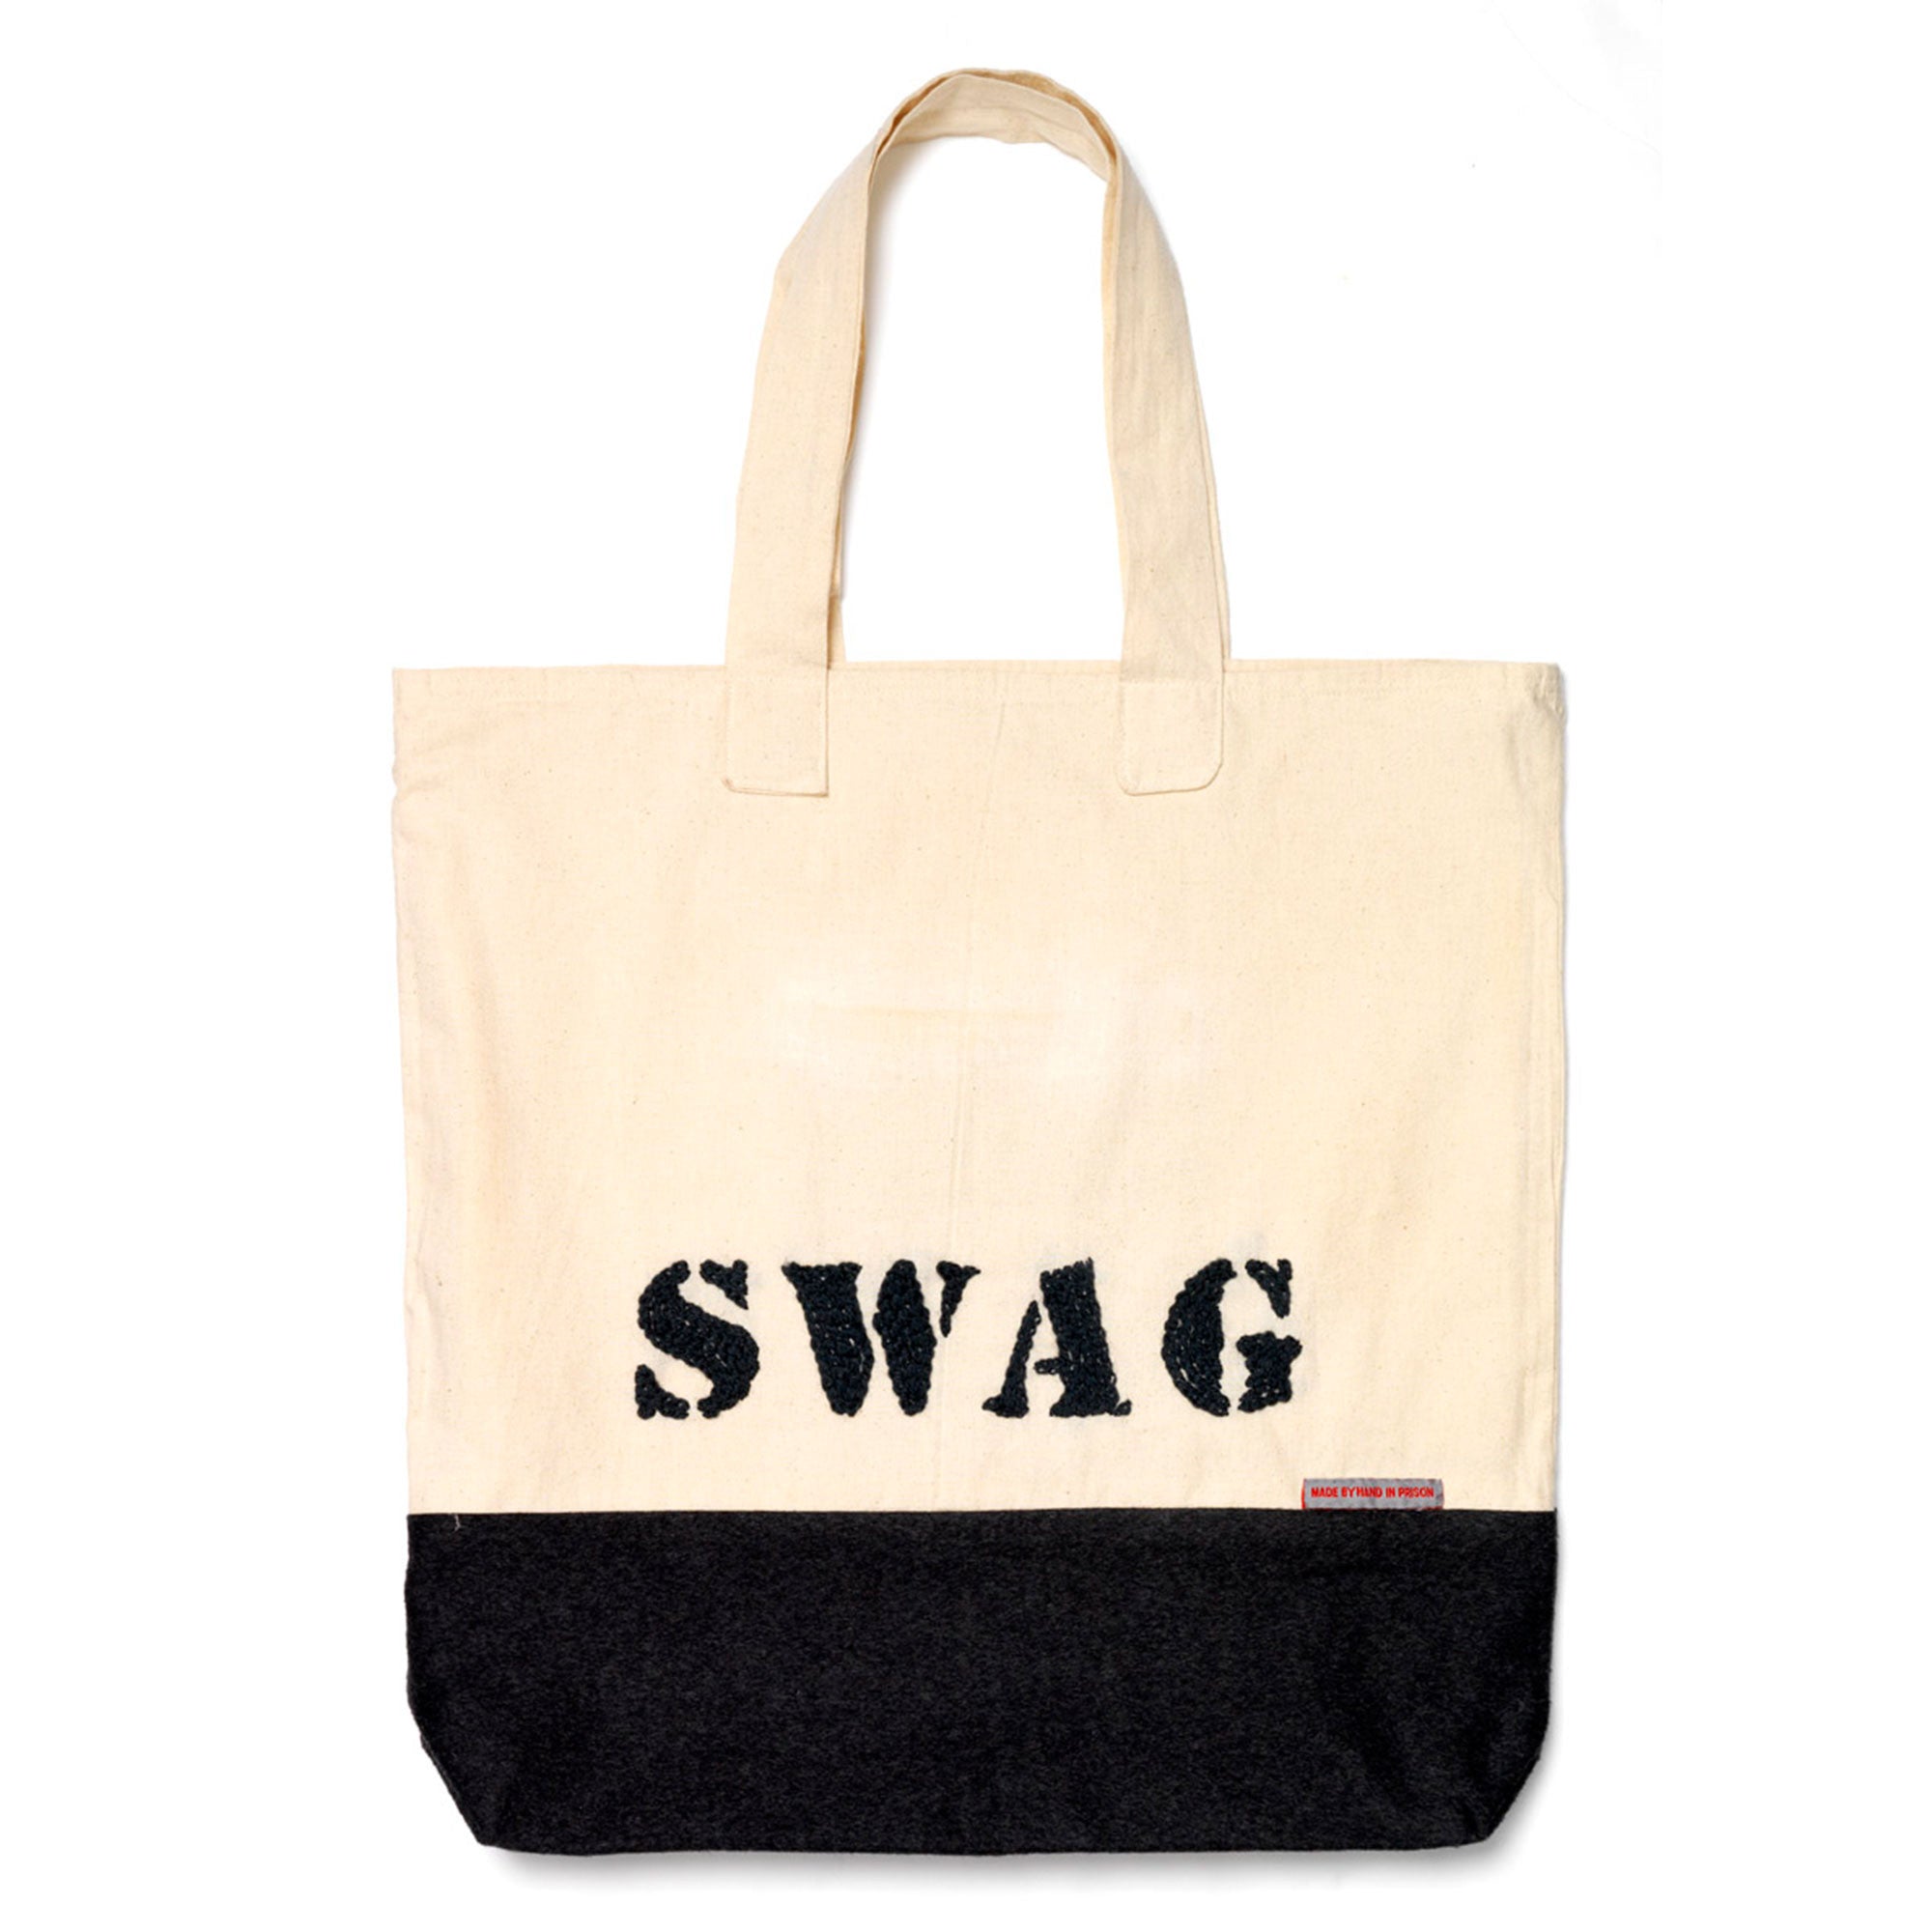 Swag Bag Hand Embroidered Black Fine Cell Work